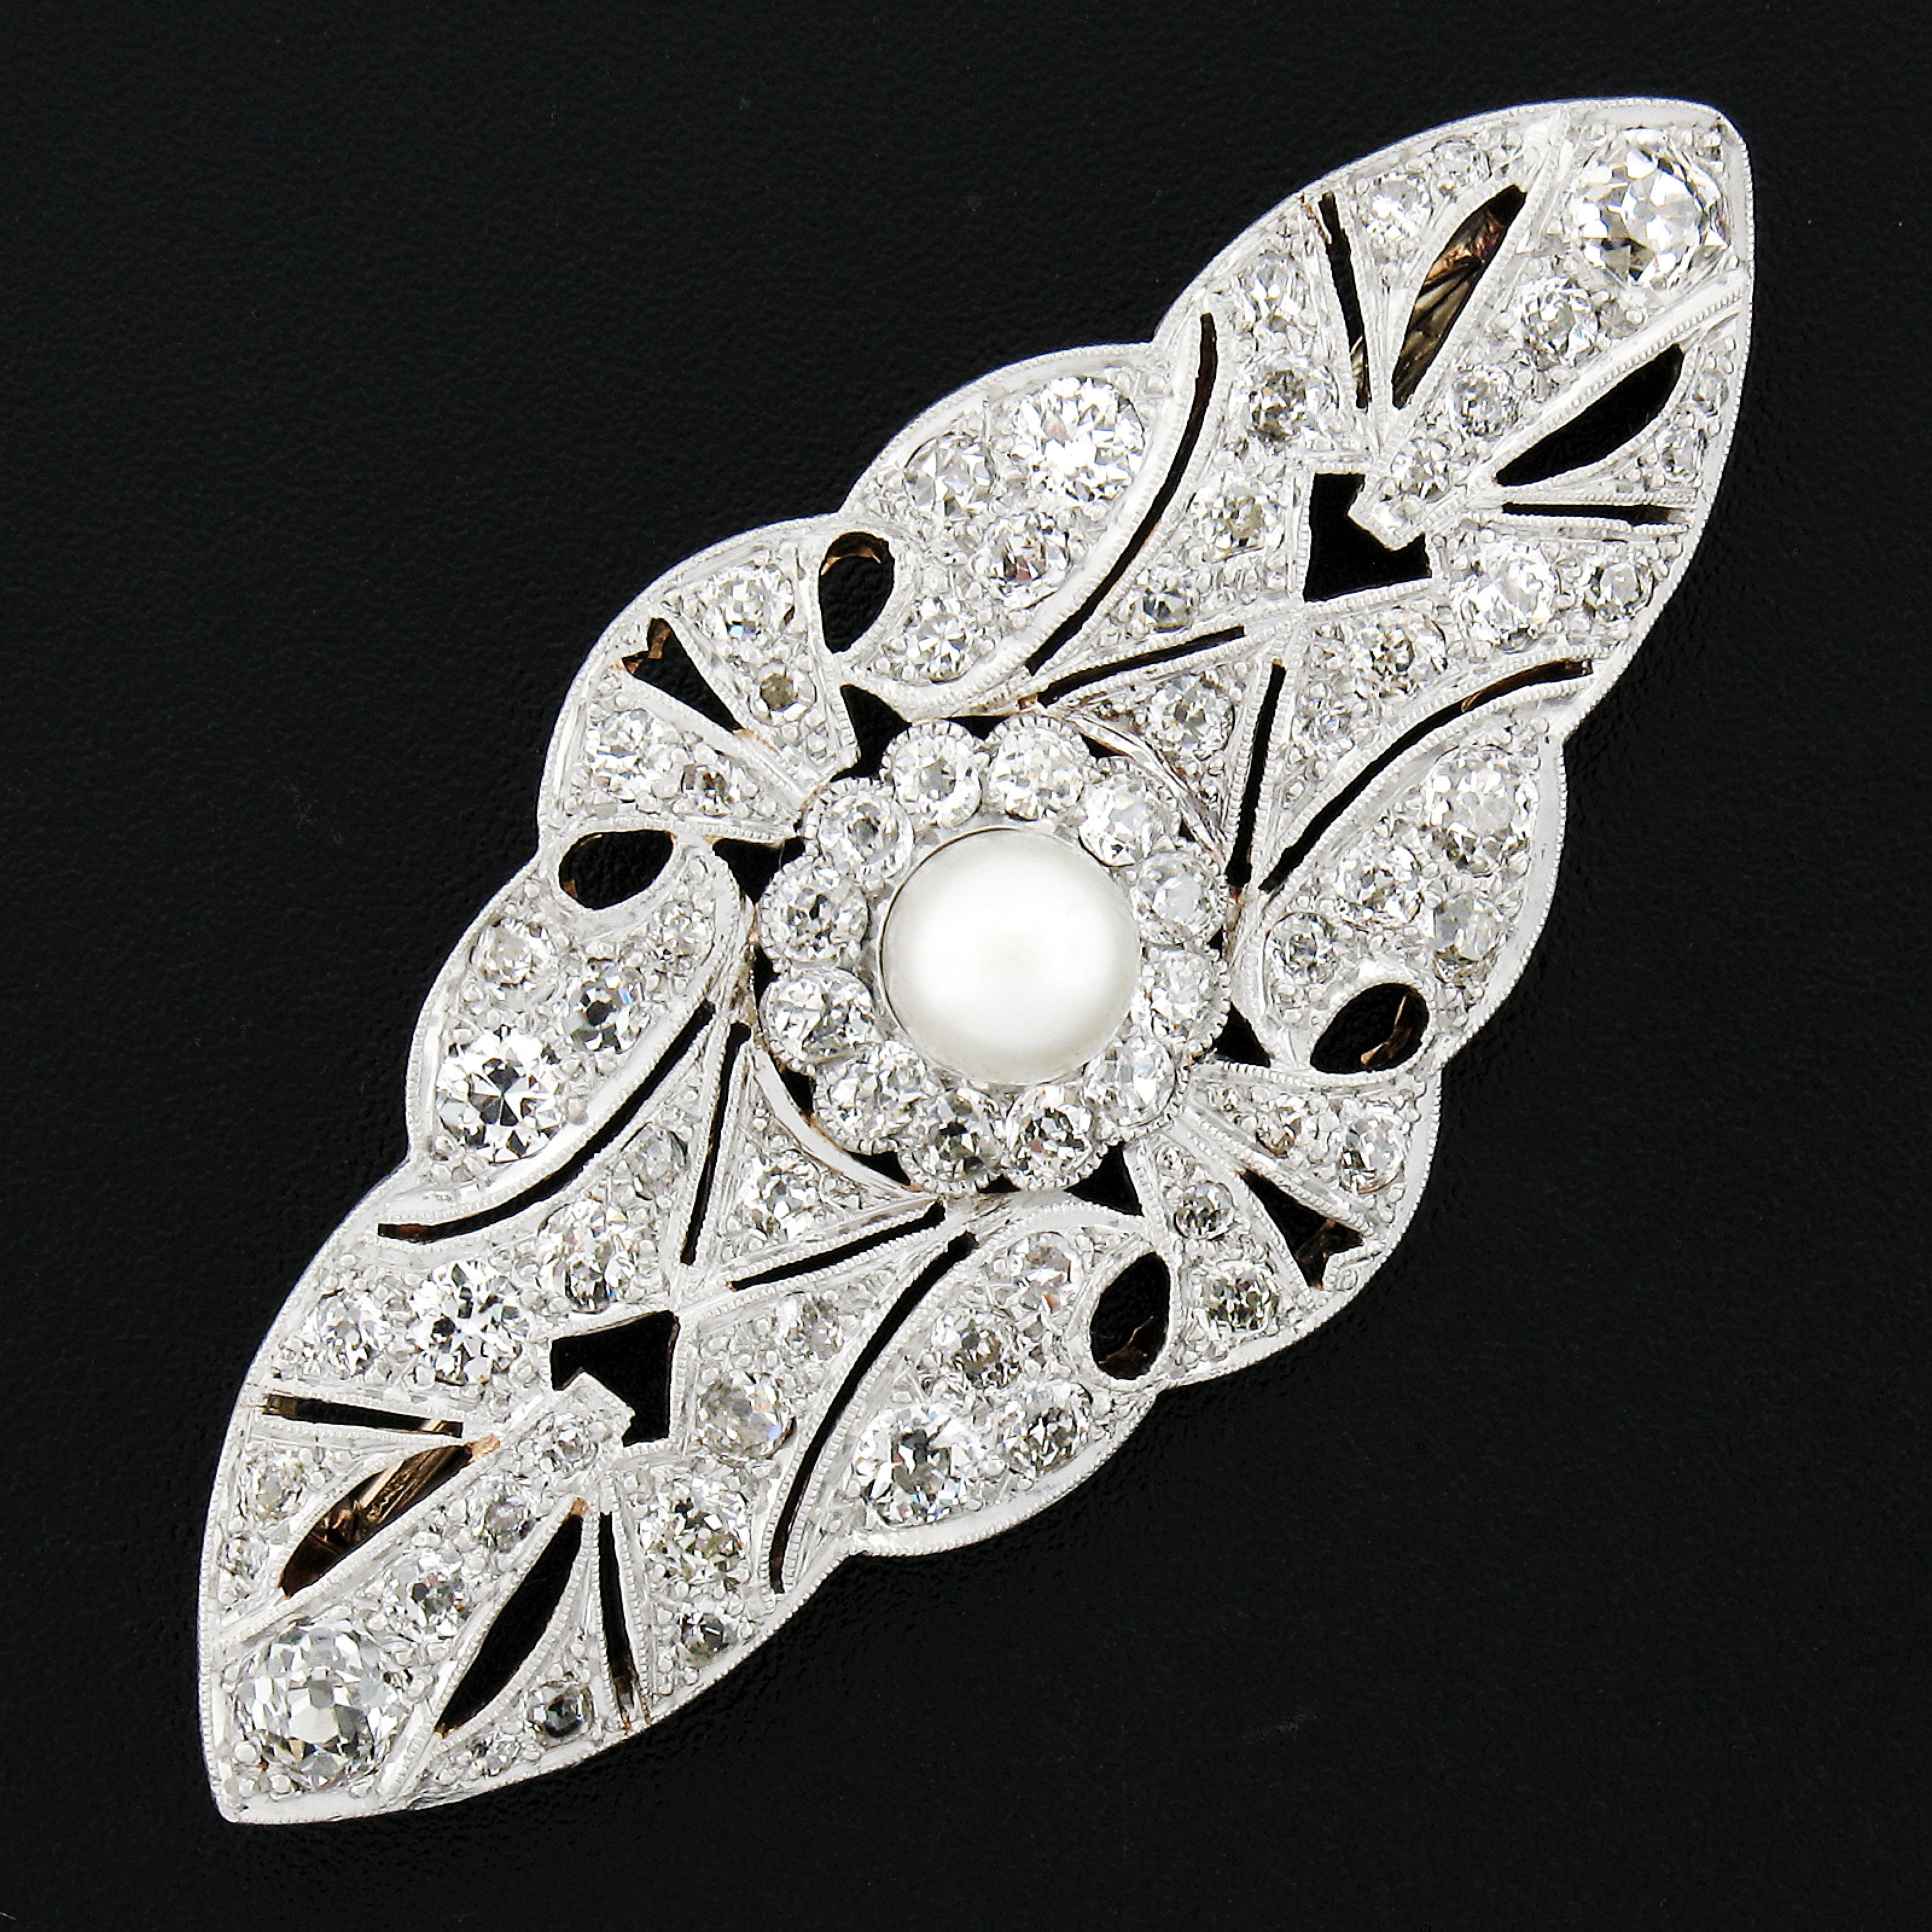 This well preserved and jaw dropping antique pin brooch is crafted during the Edwardian era from solid 18k yellow gold and platinum top. At the center of the brooch a singular round bead pearl stands out with its mesmerizing white color and is